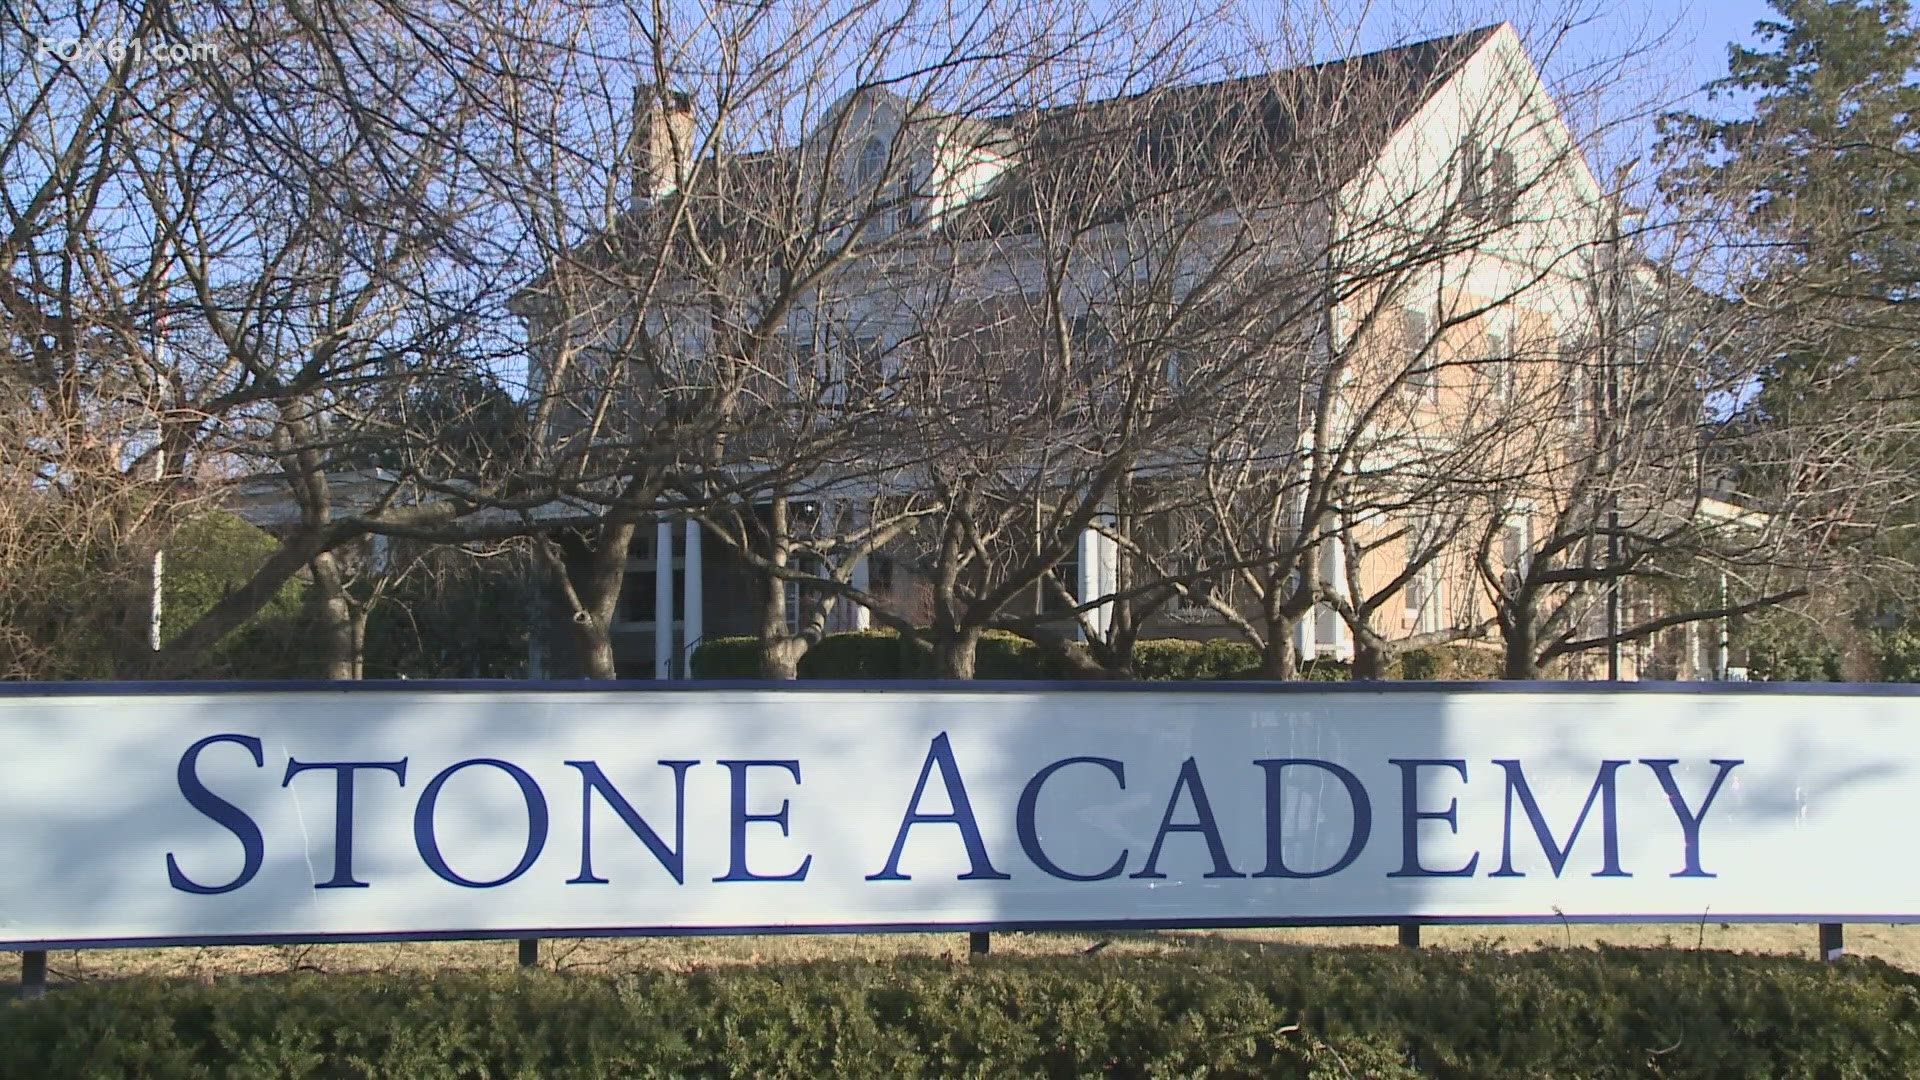 The state's case against Stone Academy has been expanded by Attorney General William Tong, his office announced Monday.